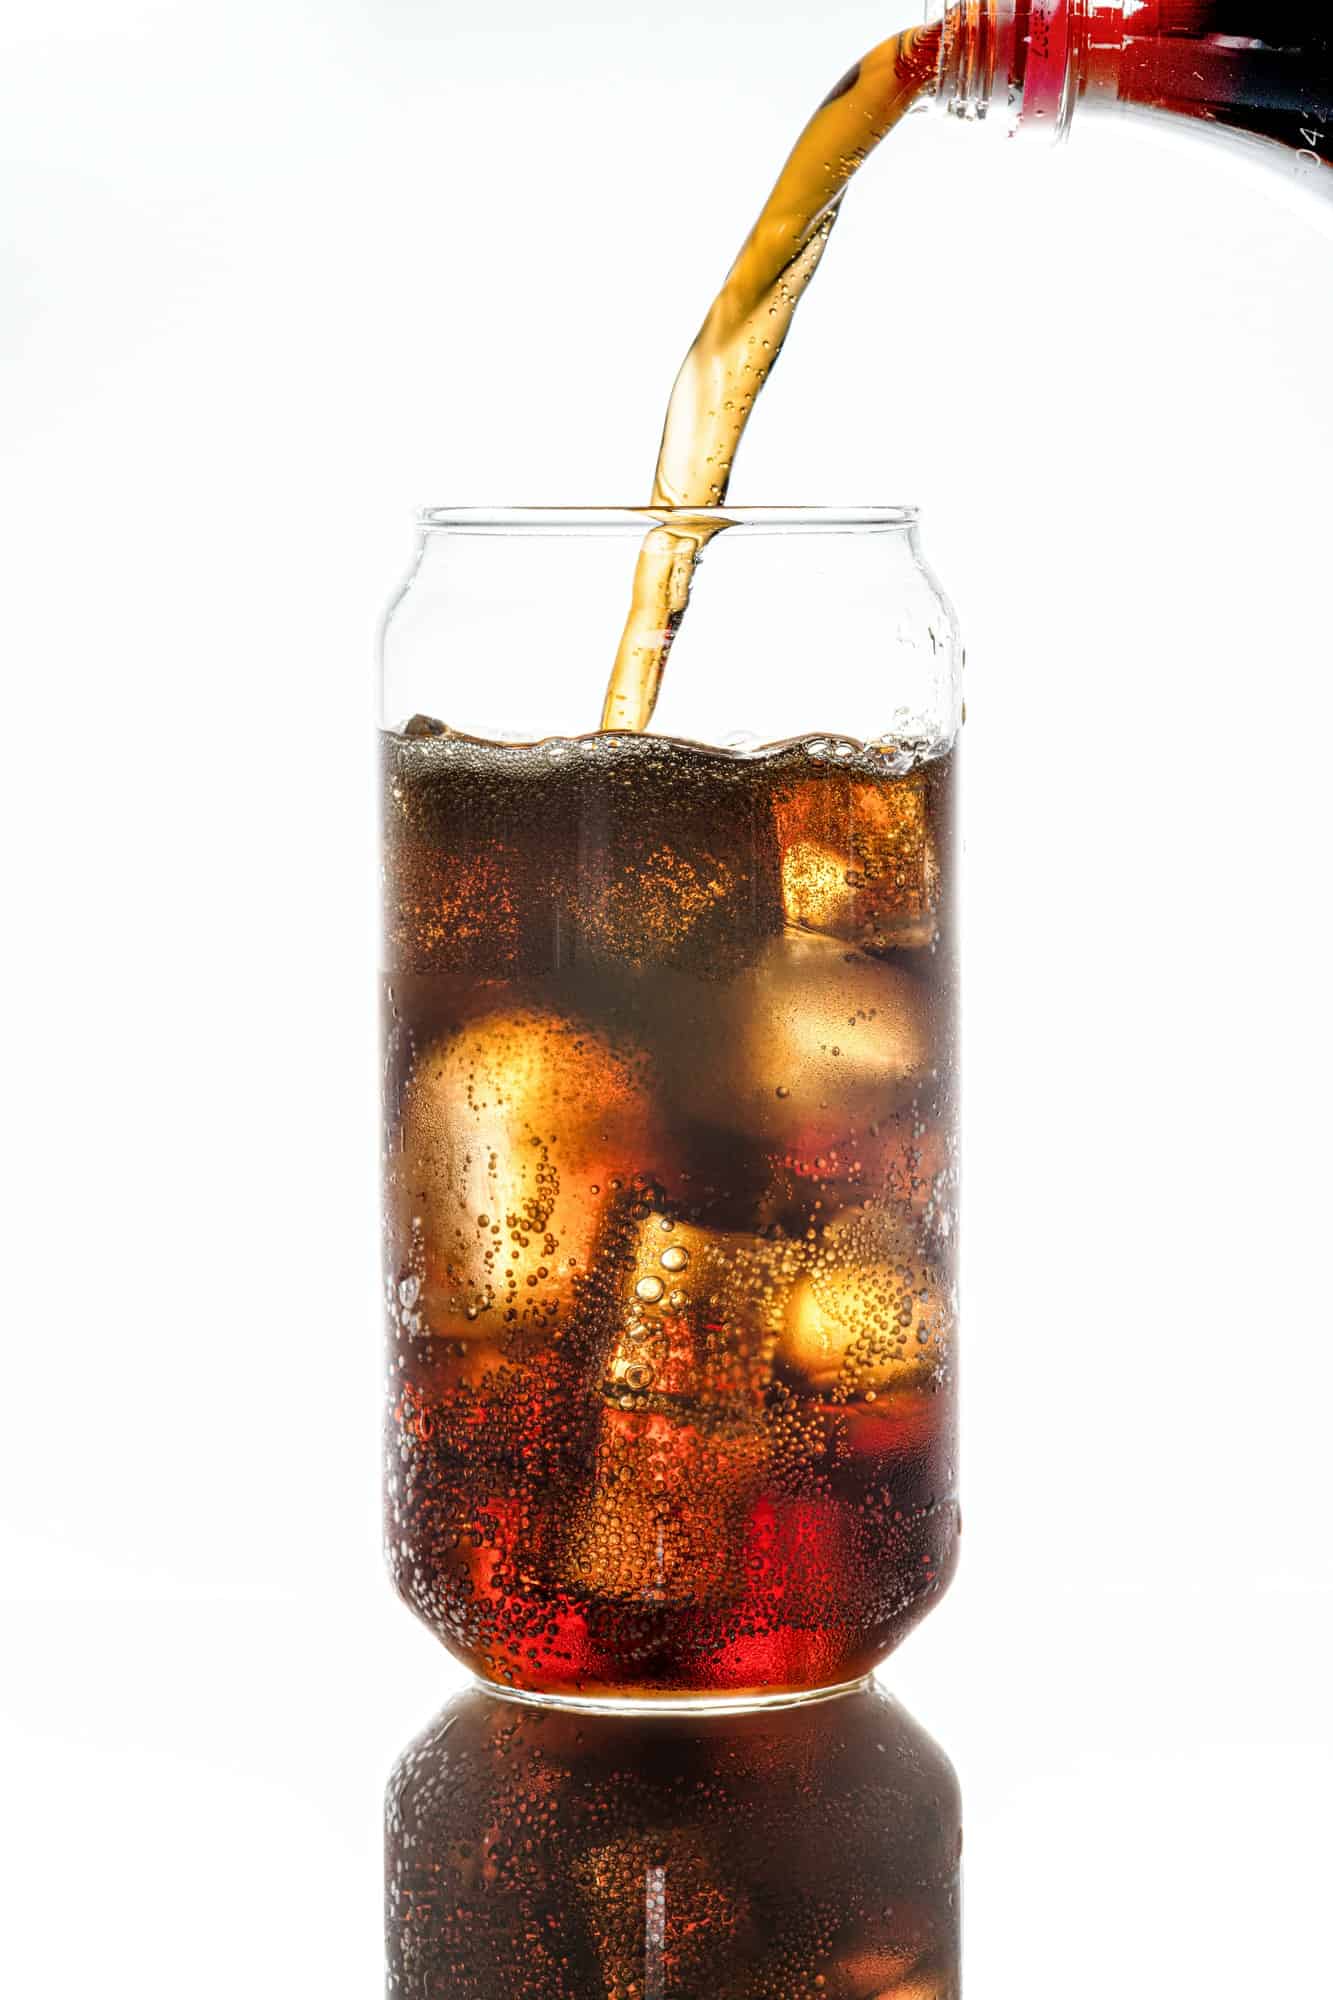 Cold carbonated drink being poured over ice cubes in a can shaped glass